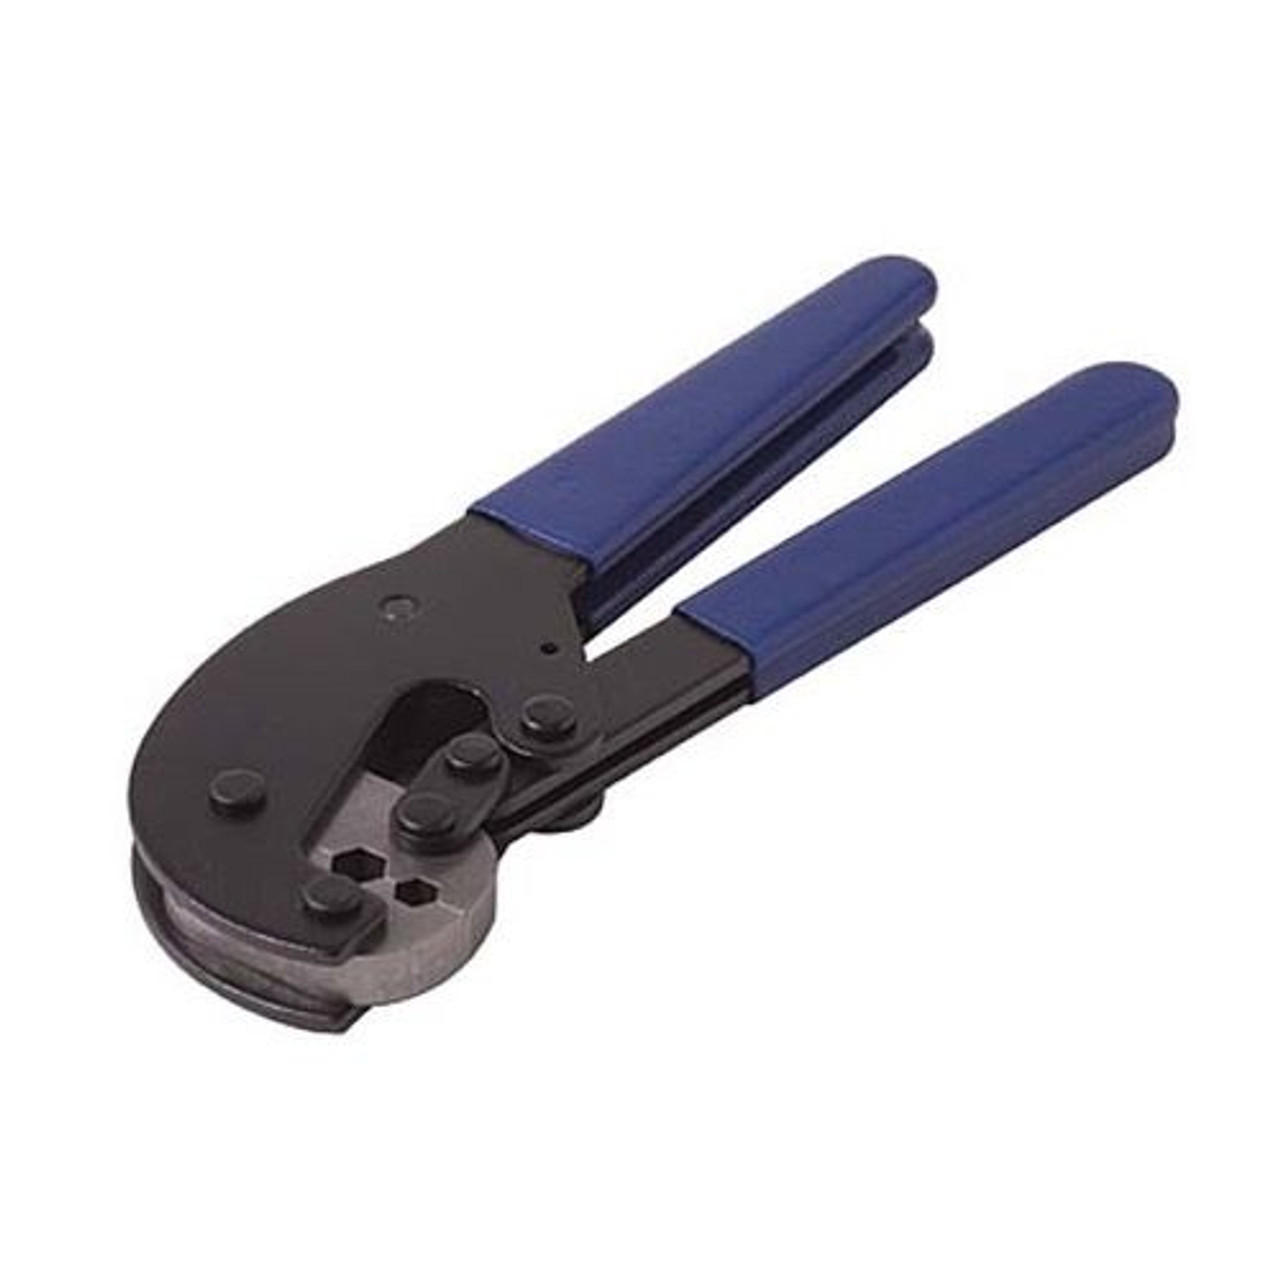 Eagle RG11 Hex Crimp Tool 2 Cavity RG11 RG6 RG59 Coaxial Connector Termination Hardened Steel 9 Inch Pro Grade with Blue Cushioned Grip RG-11 RG-6 RG59 Coaxial Hex Crimping Crimper Heavy Duty